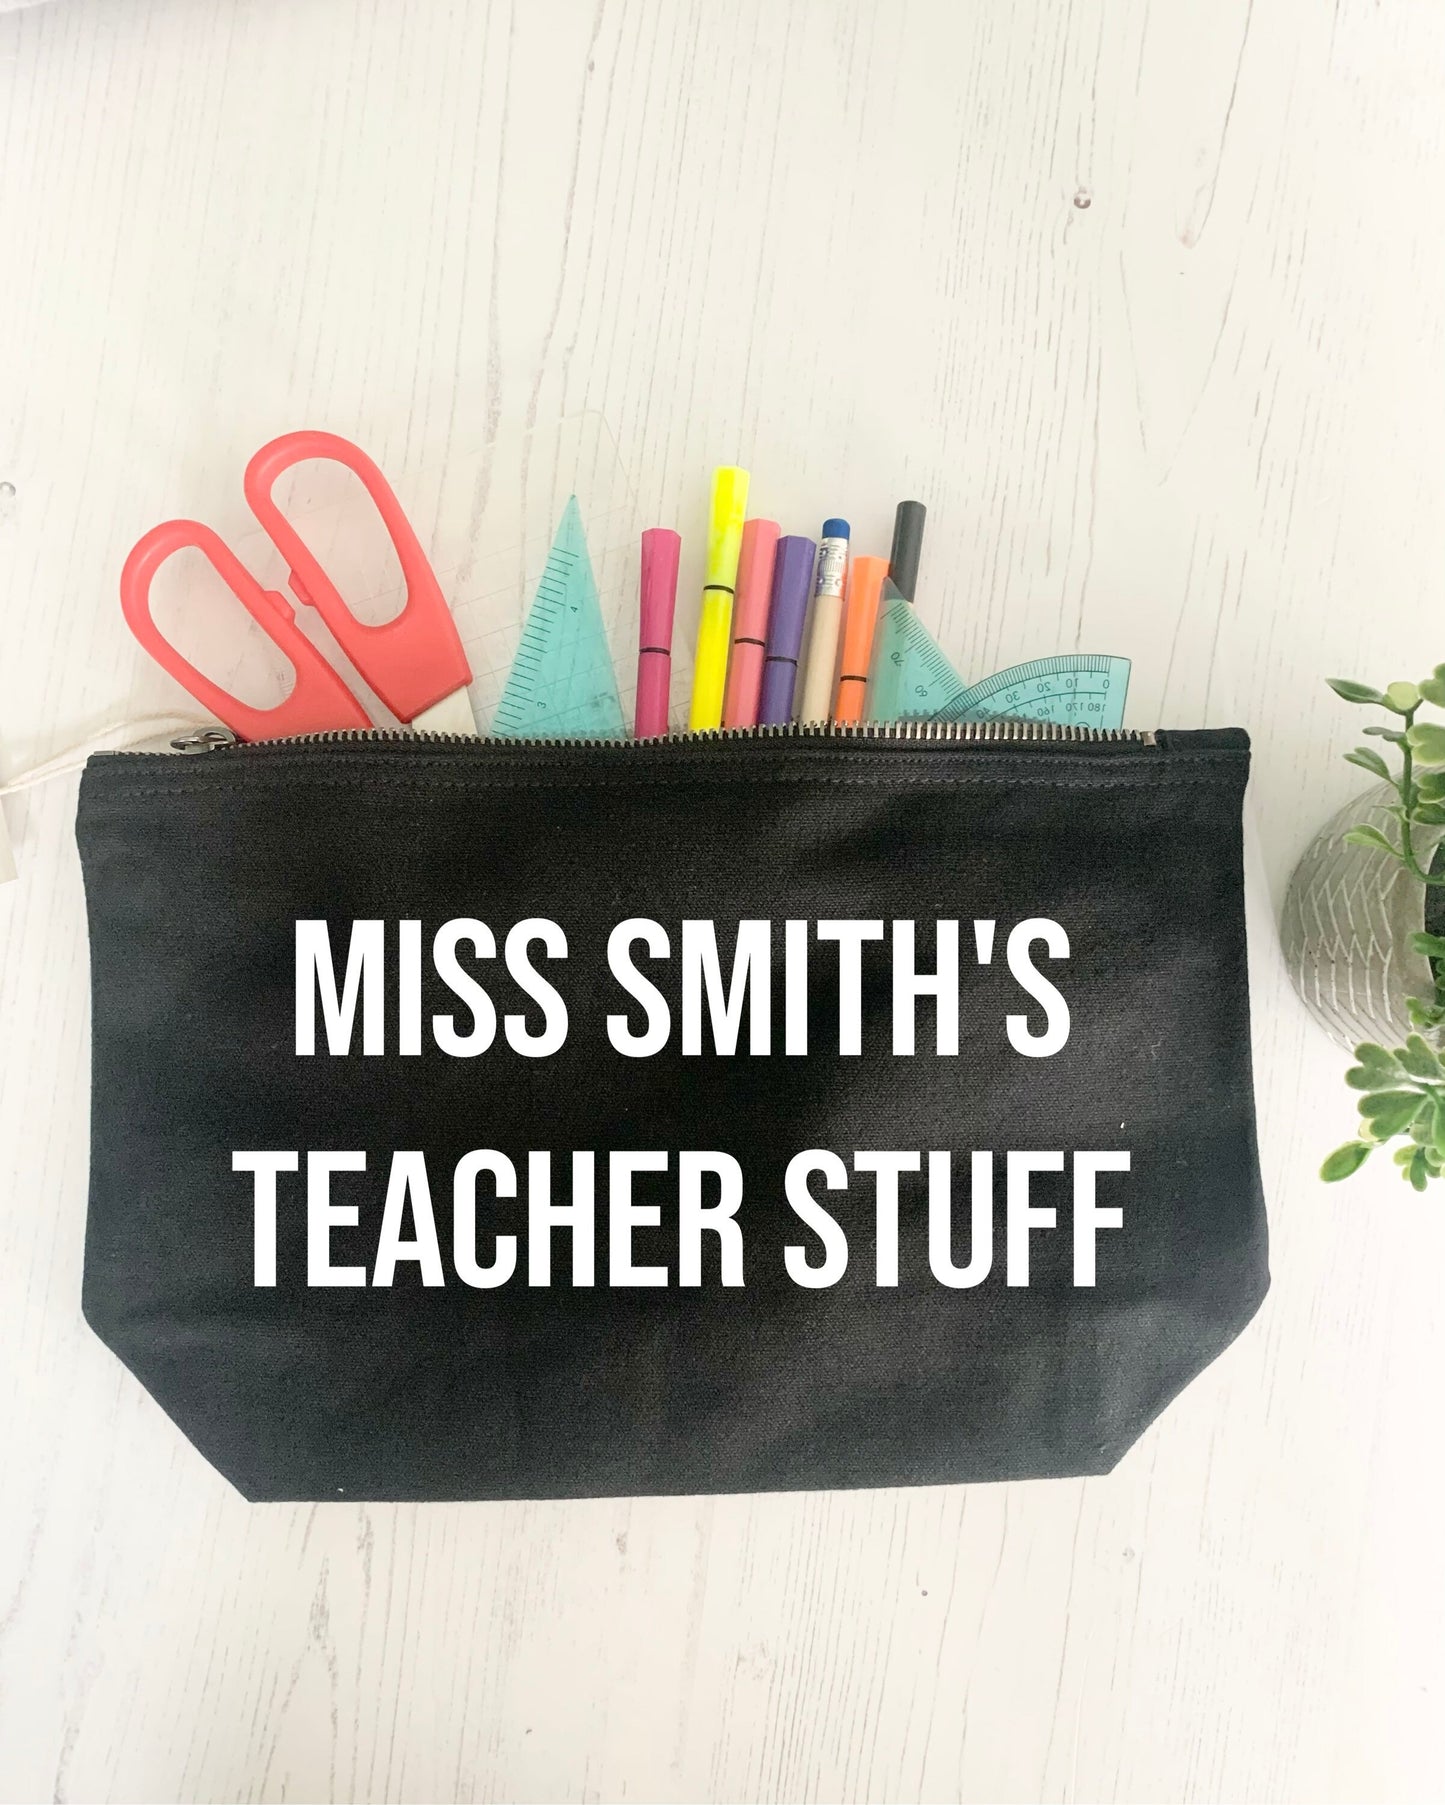 Personalised pencil case for teachers as end of year thank you gift from children, stationery pouch for teaching staff, childminders, TAs.